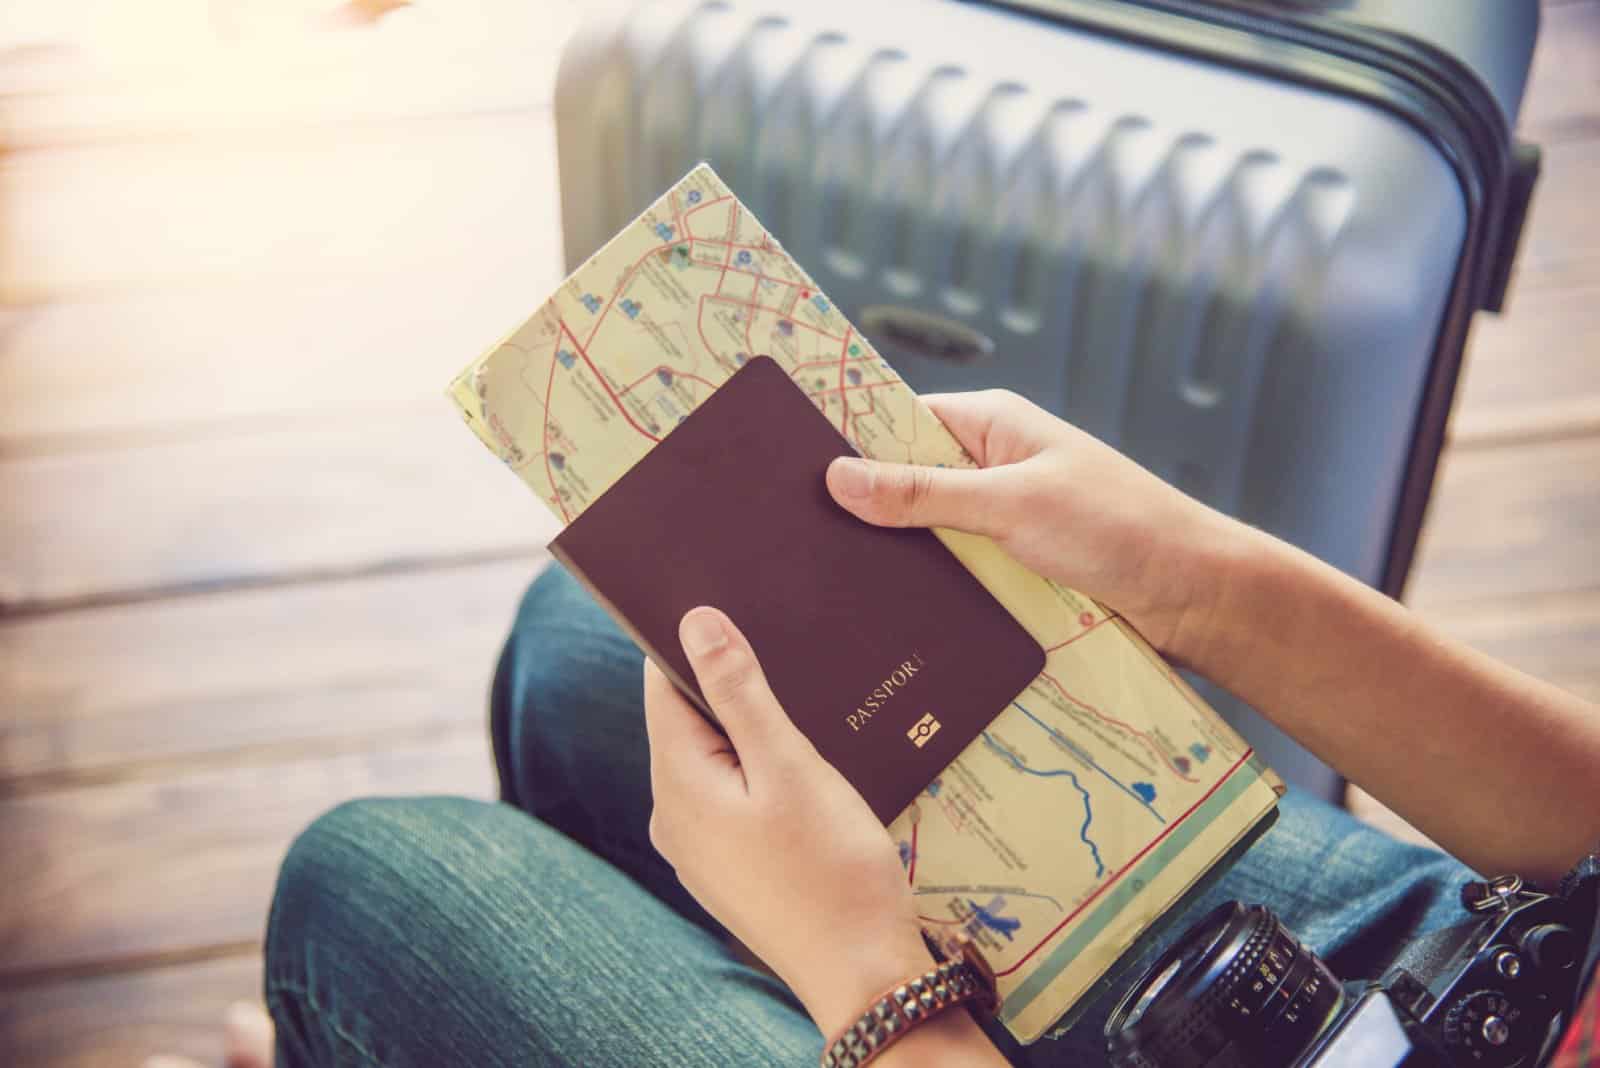 <p class="wp-caption-text">Image Credit: Shutterstock / photobyphotoboy</p>  <p><span>The simplicity of not needing a passport for travel is a convenience that can’t be overstated, making spontaneous travel all the more accessible.</span></p>